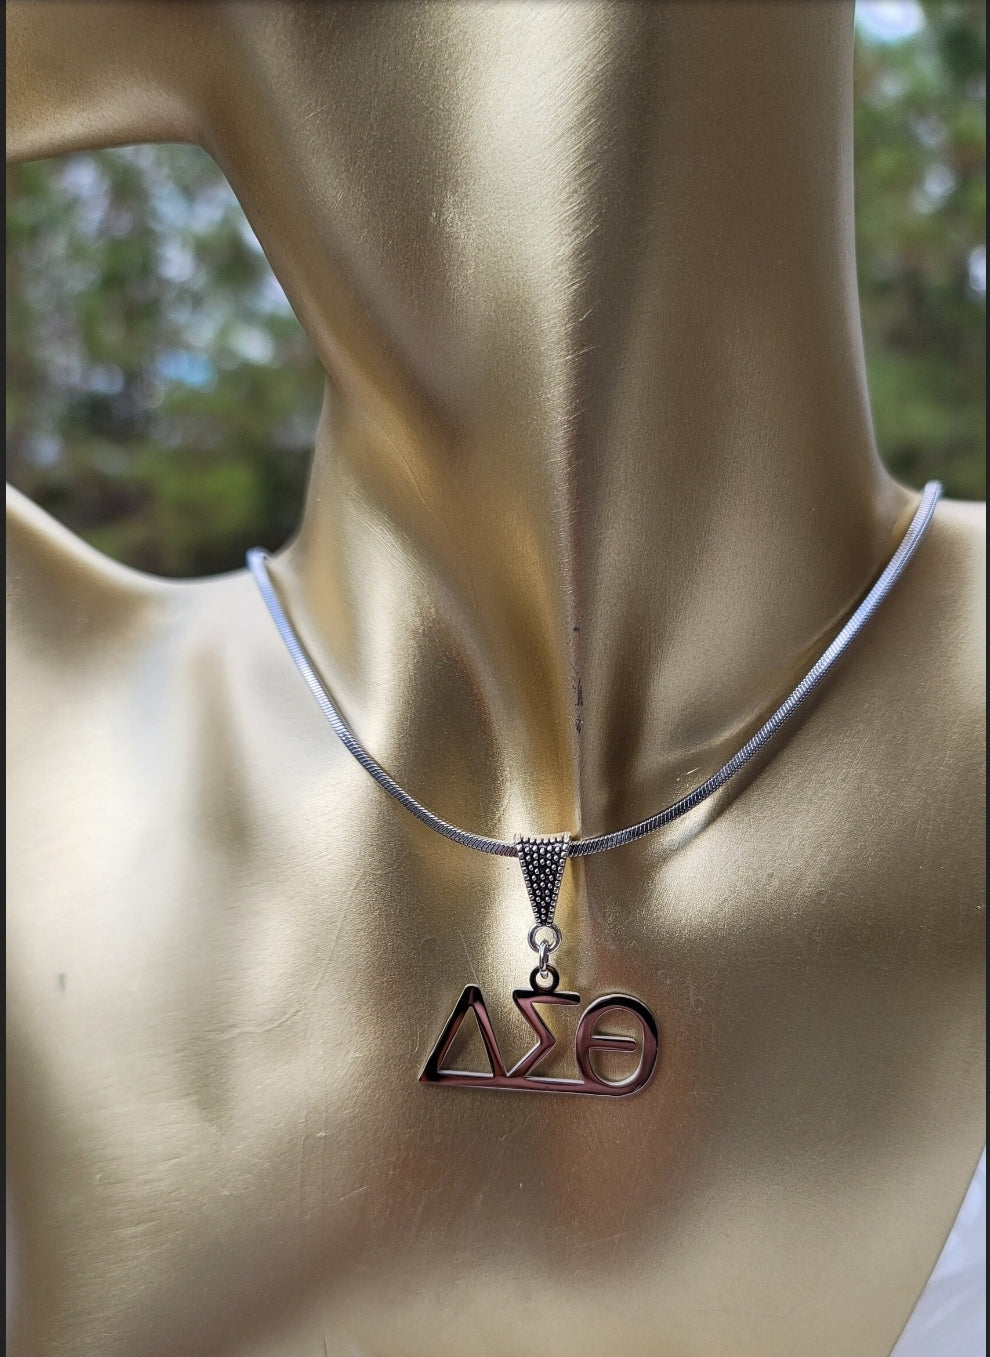 Delta Sigma Theta (Large Font) Greek Letter Sorority Necklace Available in Silver and Gold